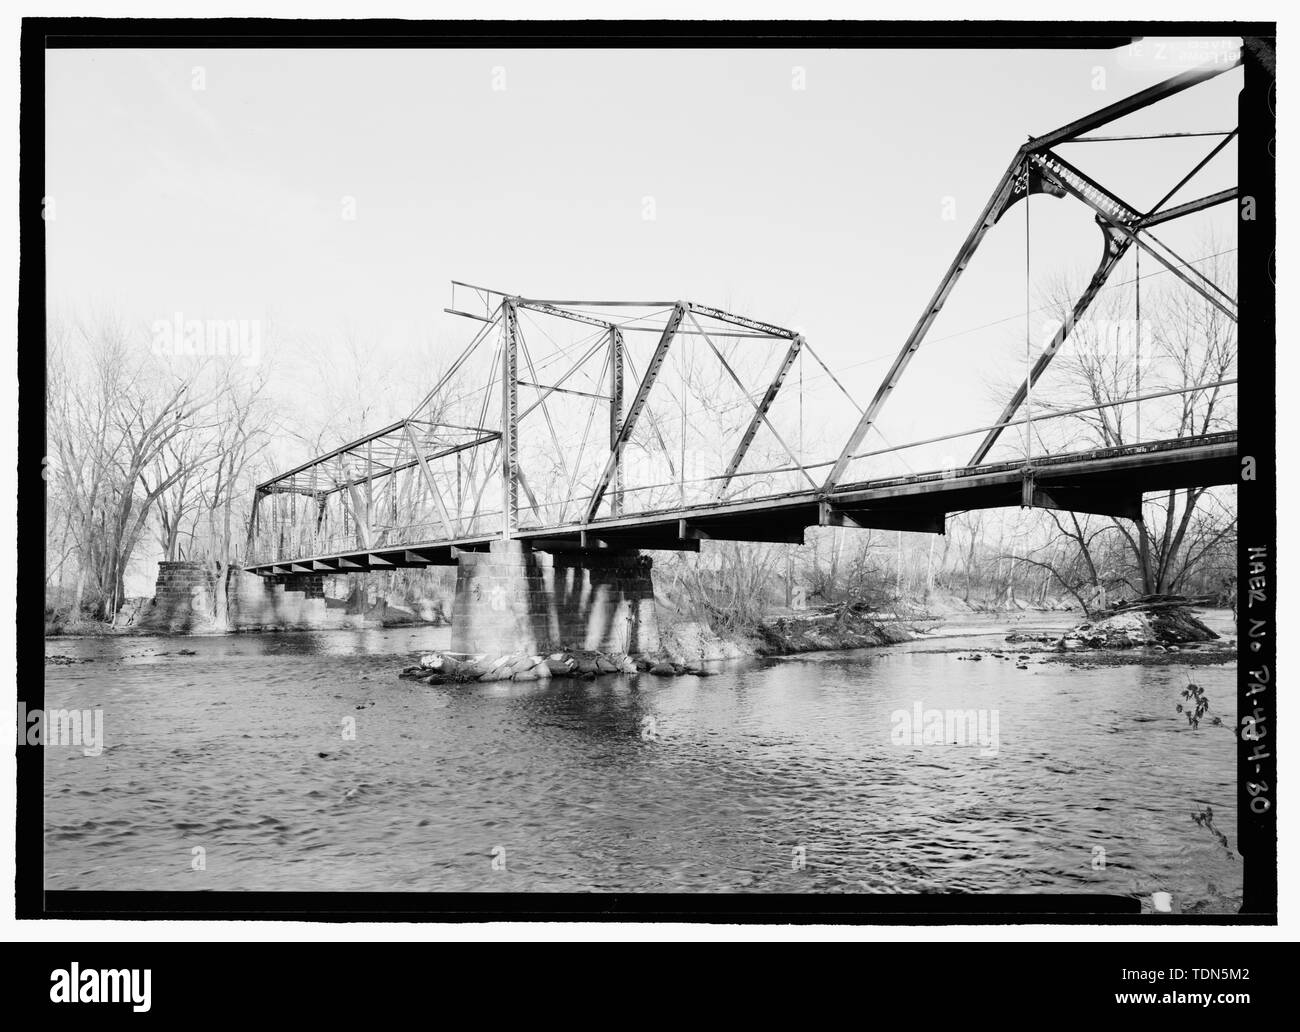 Perspective view of center cantilever and north span. - Coverts Crossing Bridge, Spanning Mahoning River along Township Route 372 (Covert Road), New Castle, Lawrence County, PA; Lawrence County Commissioners; Morse Bridge Company; Covert, John W; Kirk, H M; Craig, Jos; Chambers, St S; Wagoner, A G; Morse, Henry G; Morse, C J; Lawrence County Bridge Department, sponsor; GAI Consultants, Incorporated, contractor; Christianson, Justine, transmitter; Croteau, Todd, project manager; Flores, Roland, field team project manager; Dzodin, Joel S, historian; Dzodin, Joel S, photographer; Vidutis, Richard Stock Photo